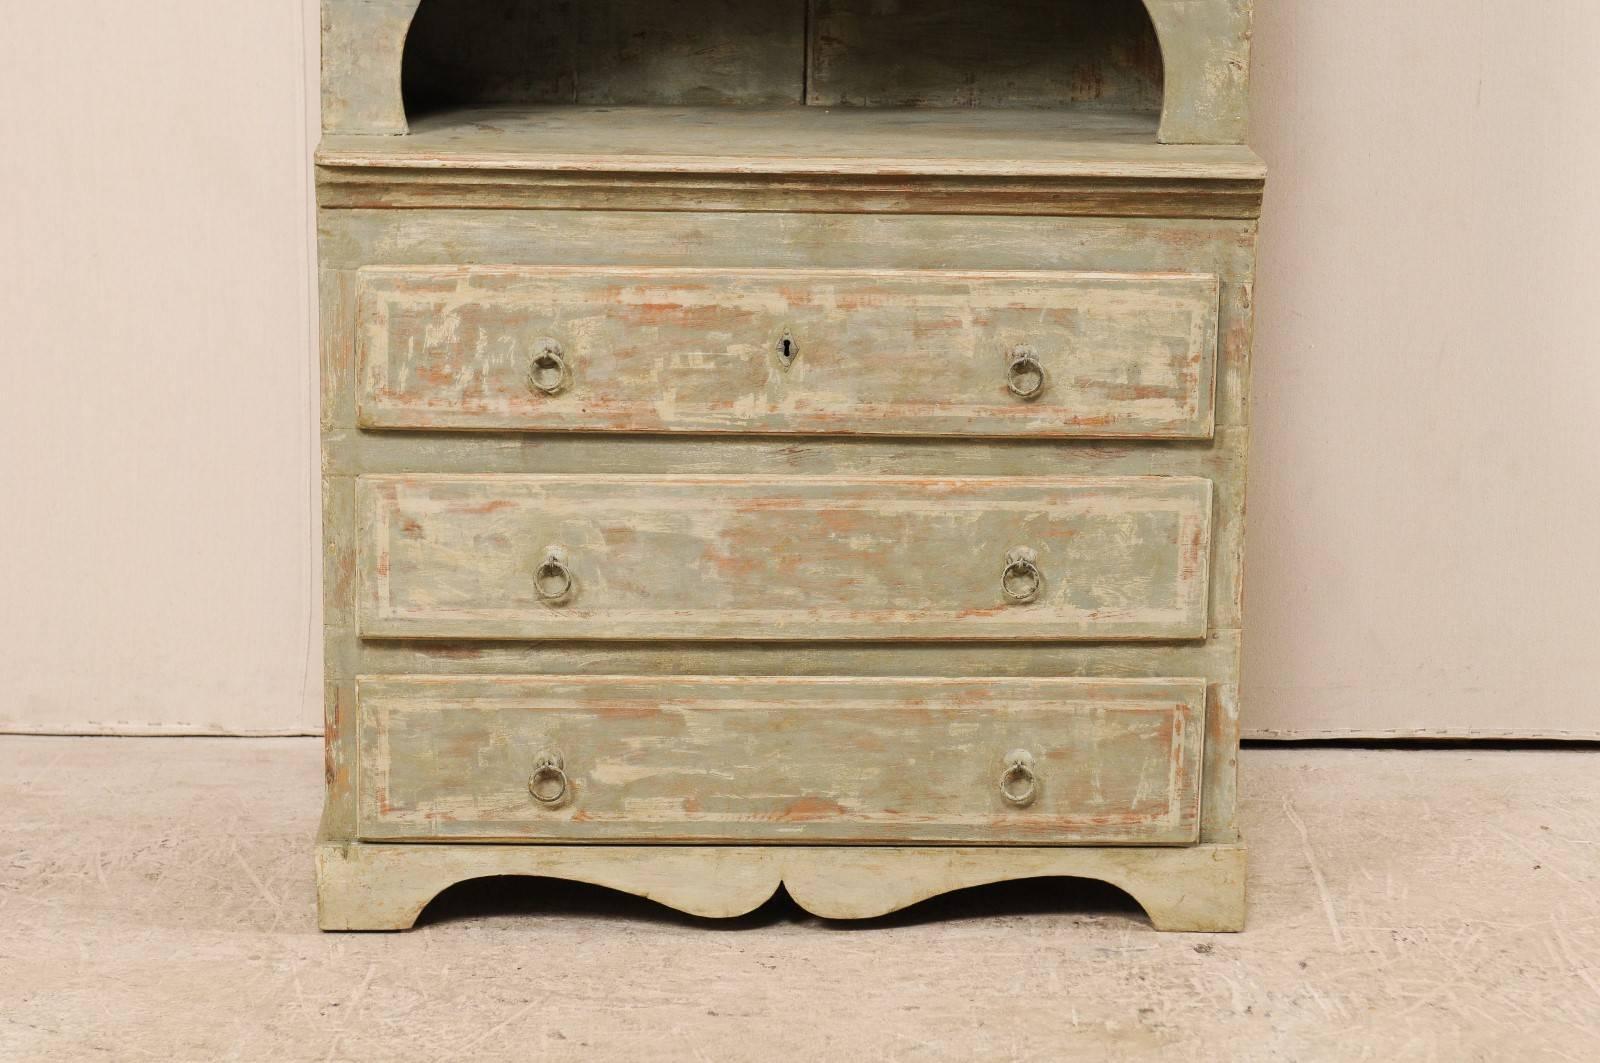 Metal Early 19th Century Swedish Scraped Finish Cupboard with Elegant Scalloped Shapes